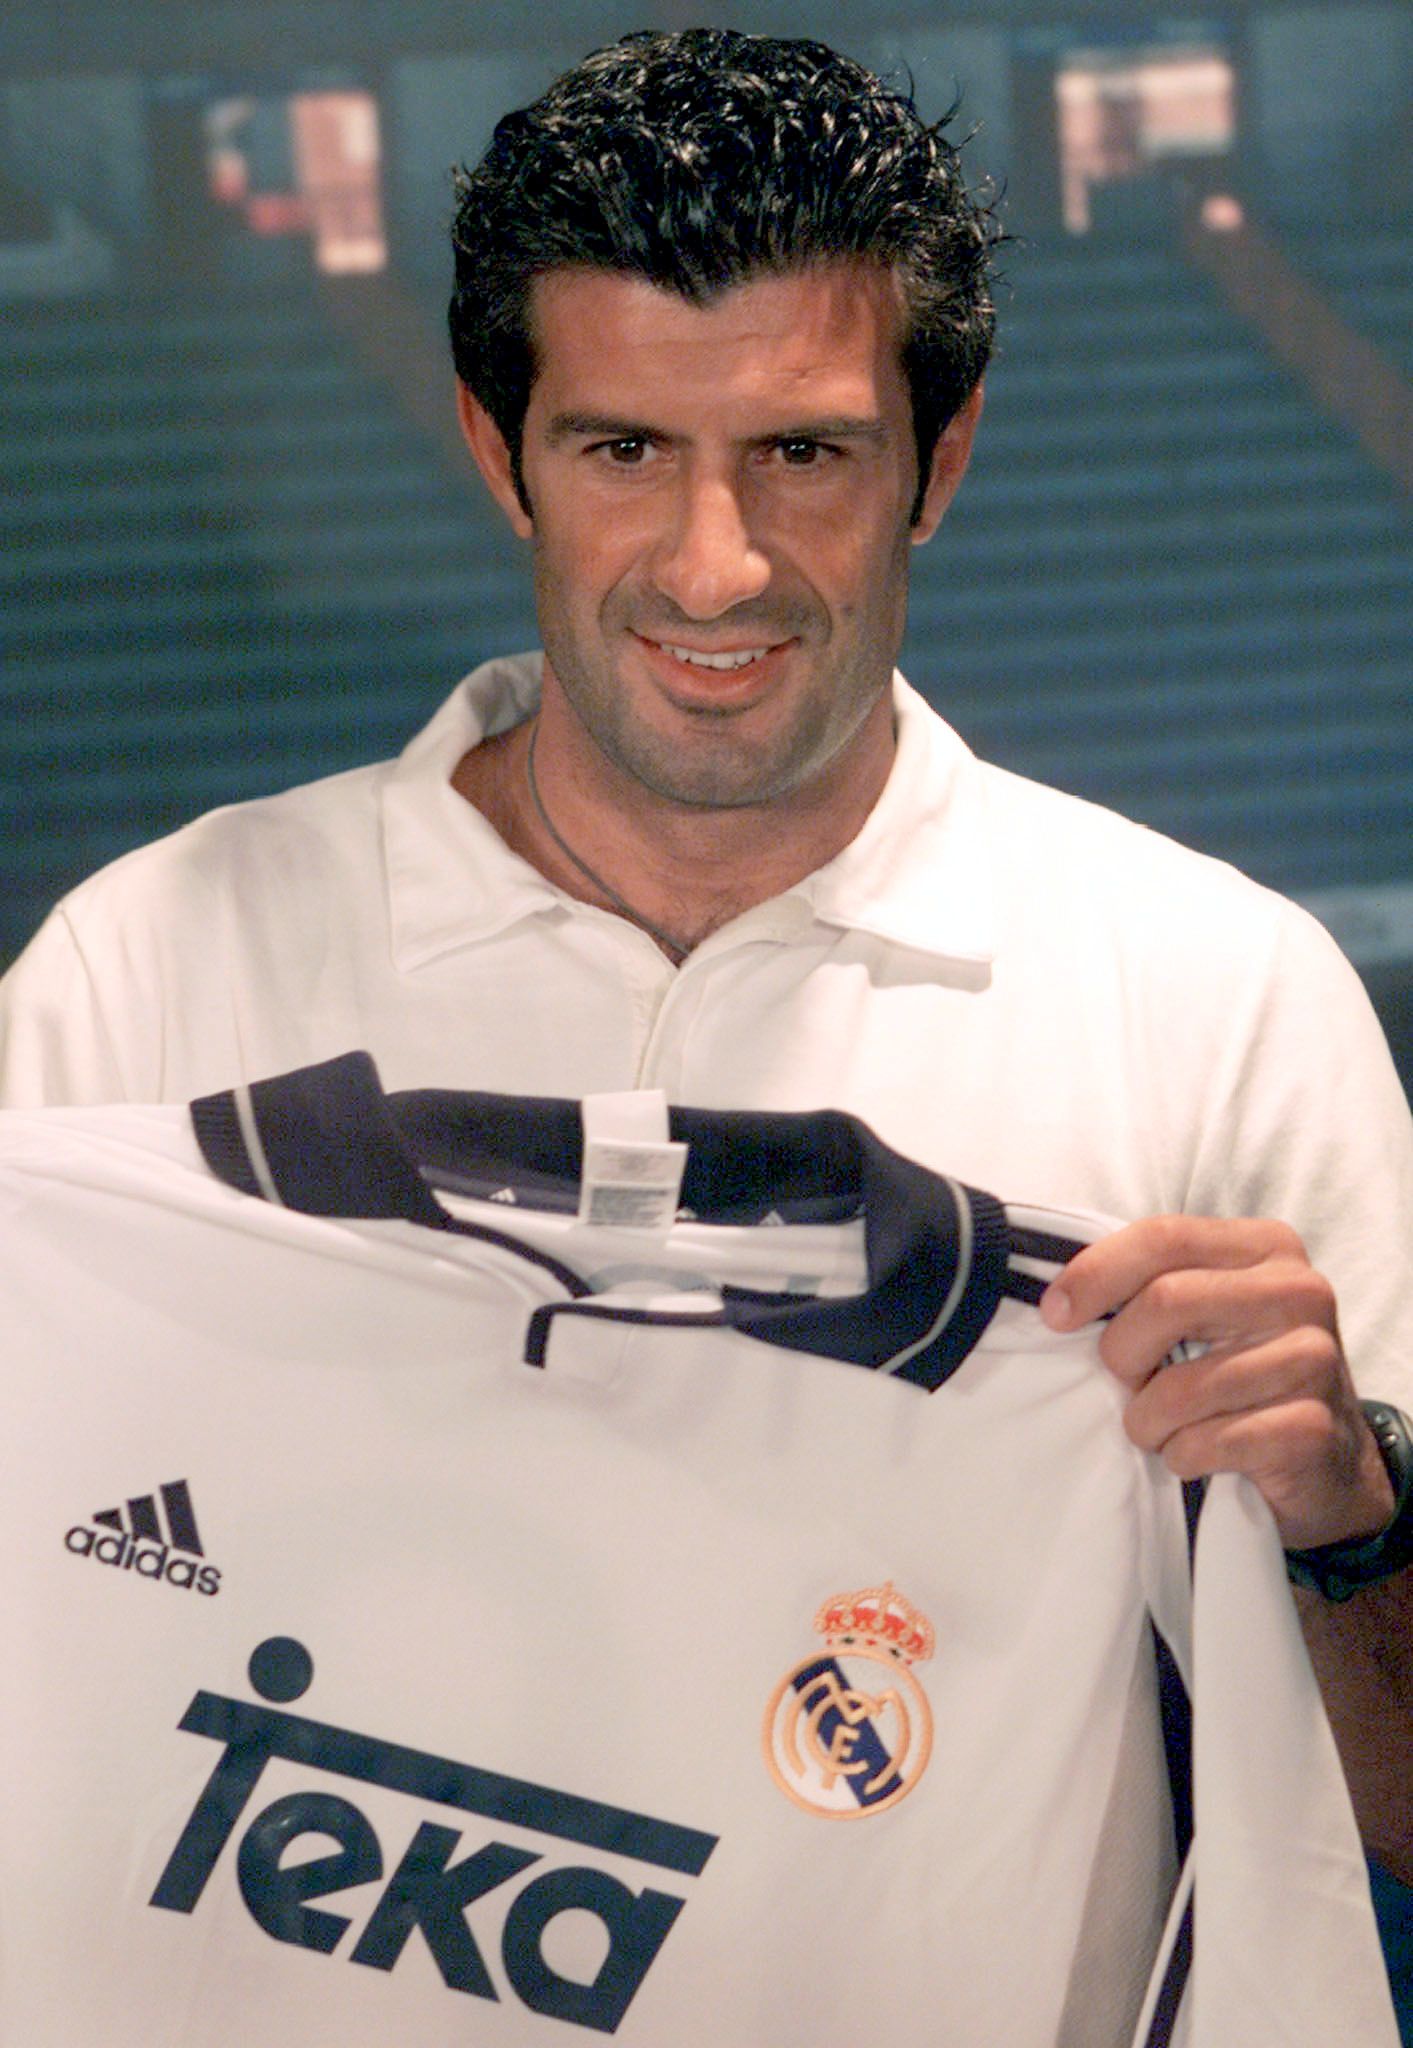 Figo signs for Real Madrid.